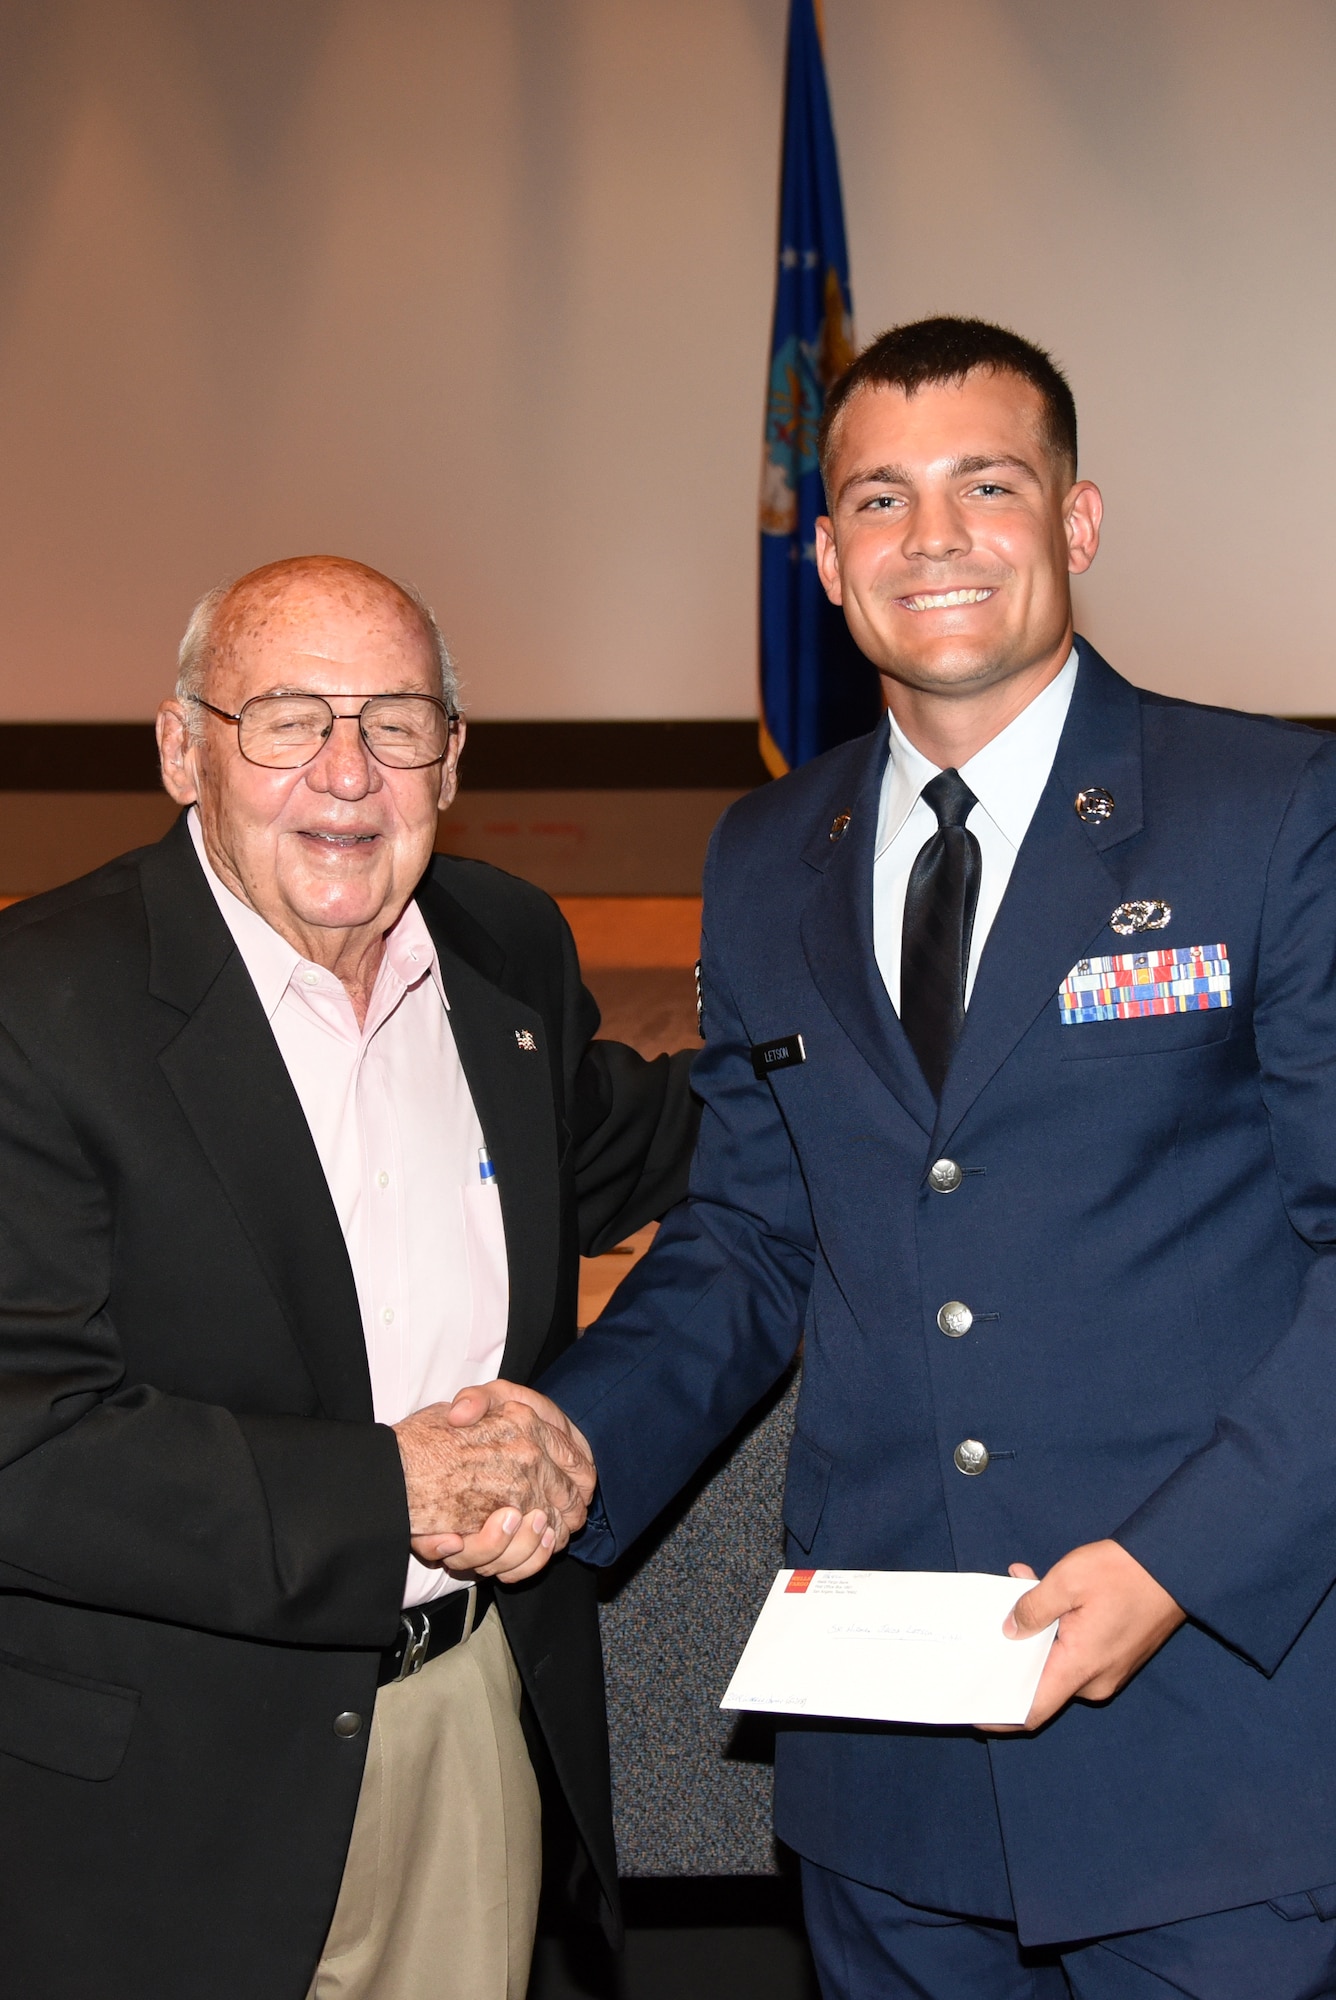 Retired U.S. Air Force Col. Charles Powell, former 17th Training Wing commander, hands Senior Airman Jacob Letson, 17th Civil Engineer Squadron engineering technician, the Powell Warrior Award during a Community College of the Air Force graduate ceremony at the base theater on Goodfellow Air Force Base, Texas, June 15, 2018. The award is given to CCAF graduates who have displayed the highest degree of professional military excellence. (U.S. Air Force photo by Staff Sgt. Joshua Edwards/Released)